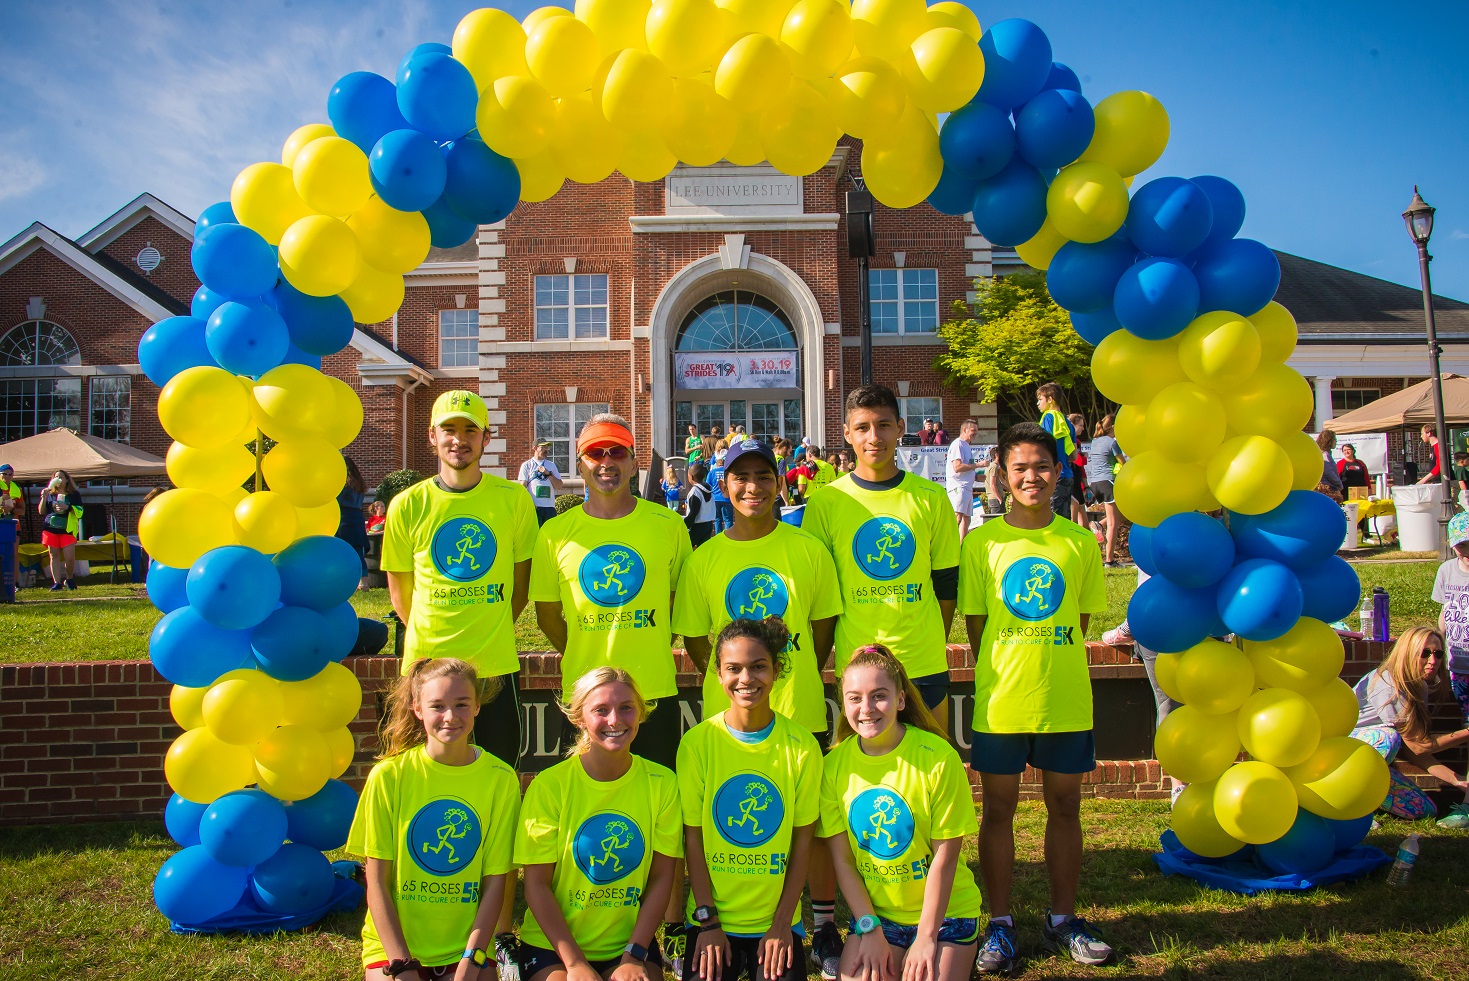 XC Completes 5K For Charity Saturday